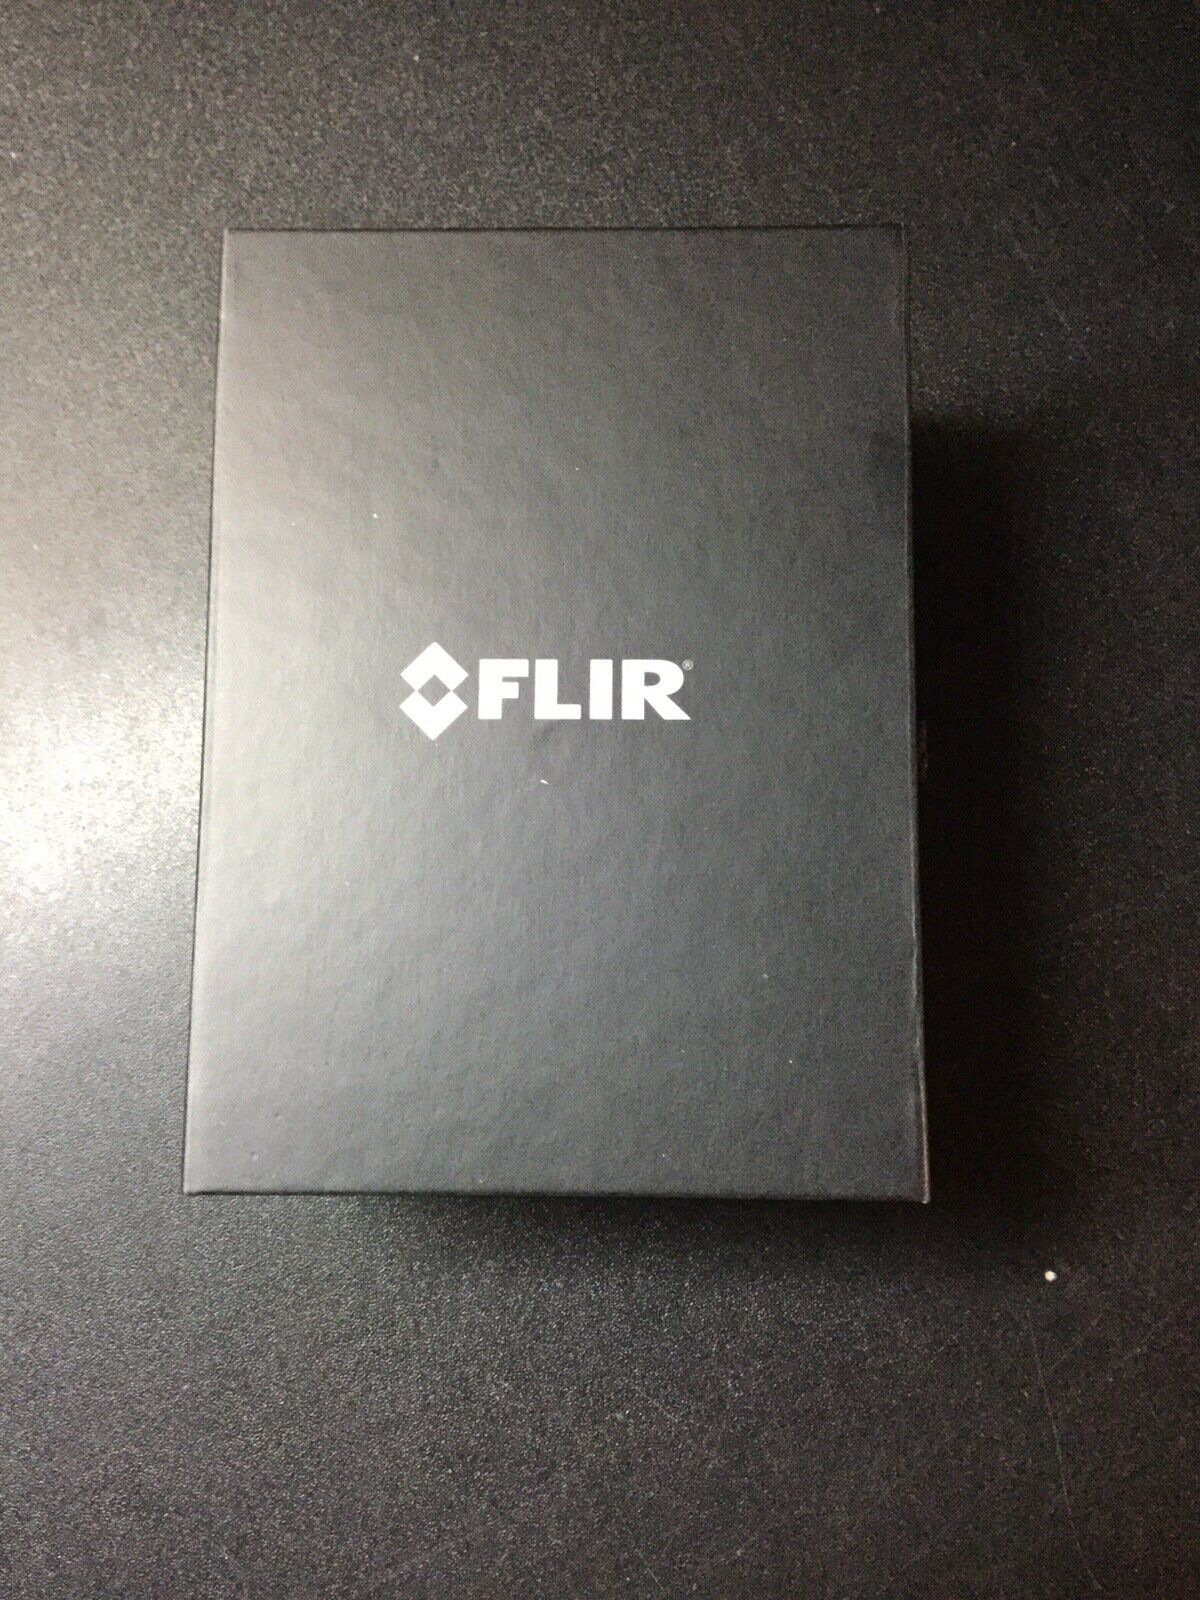 Flir One Pro Thermal Imaging Infrared Camera For iPhone iOS New Open Box